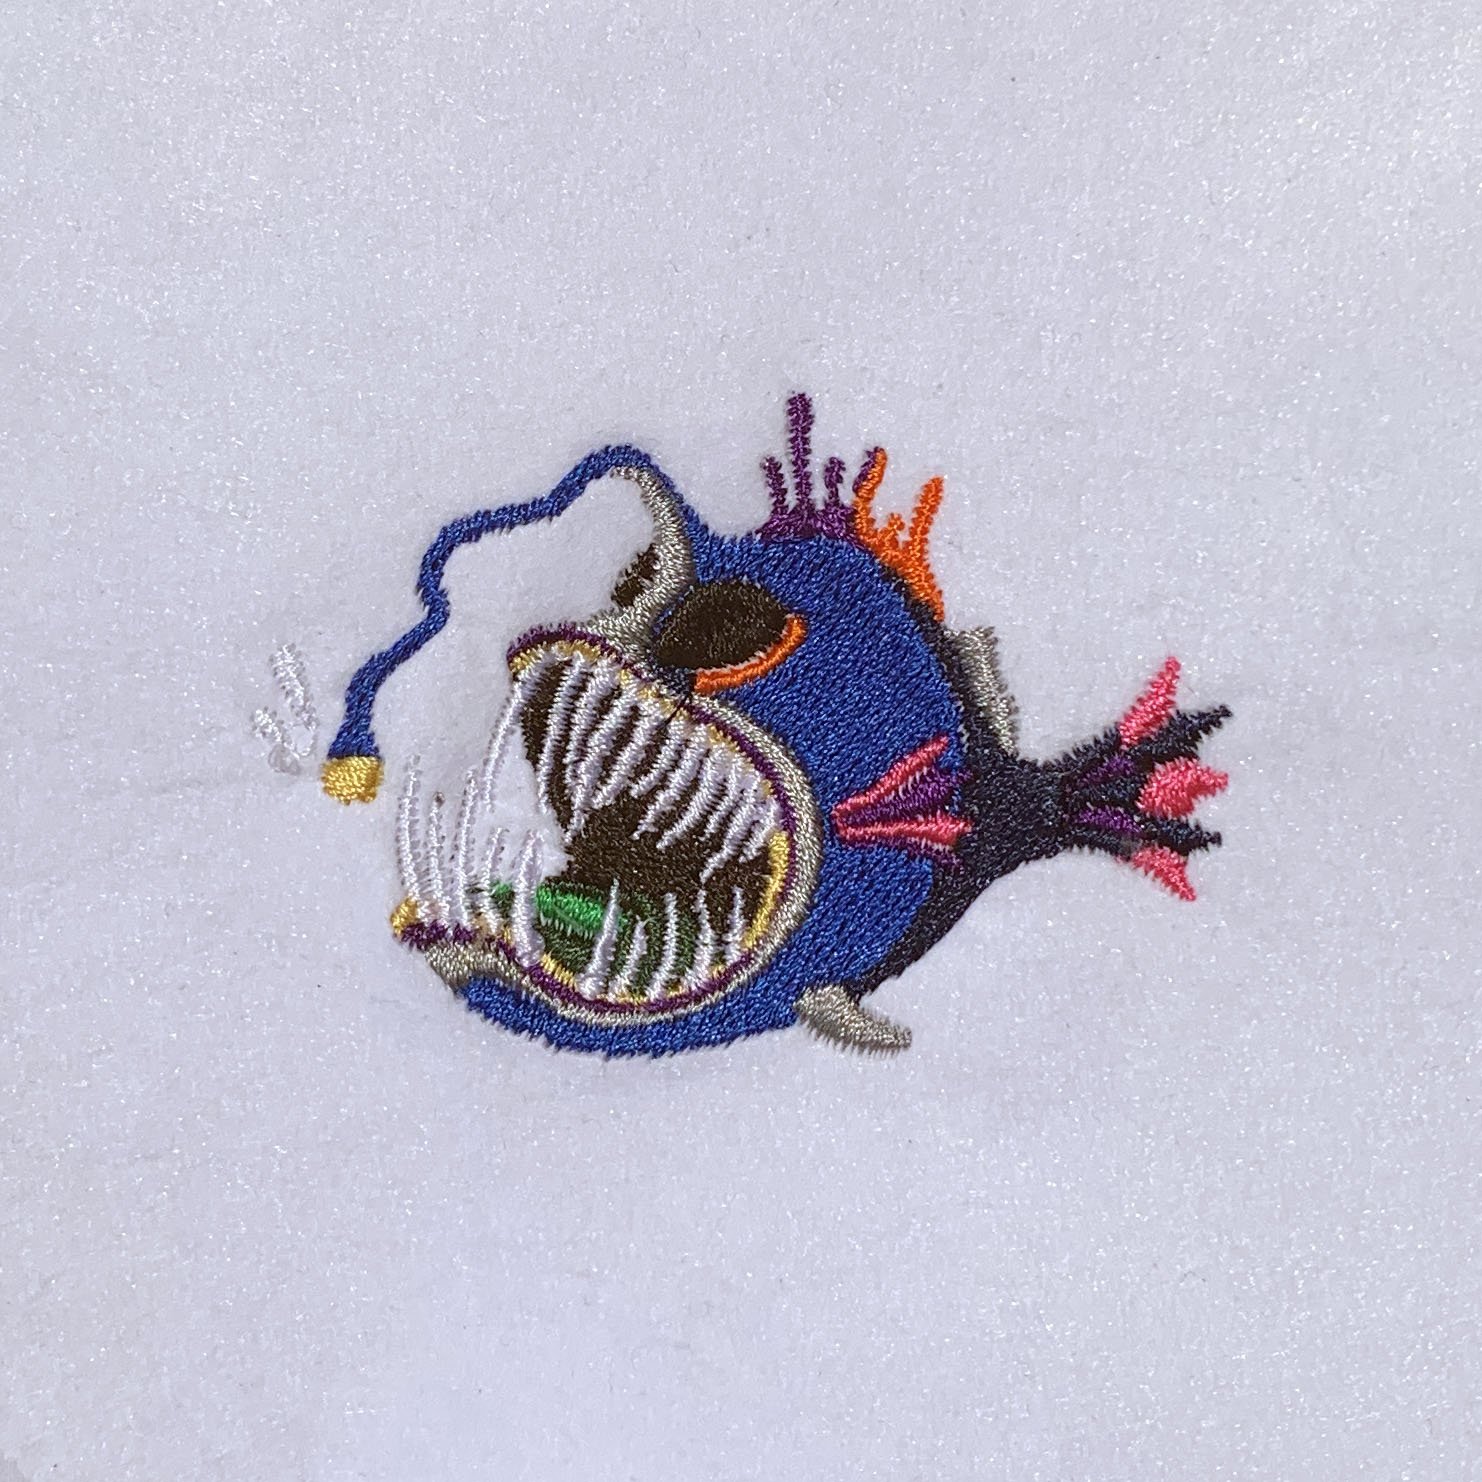 Embroiderd Logo: a very colorful anglerfish